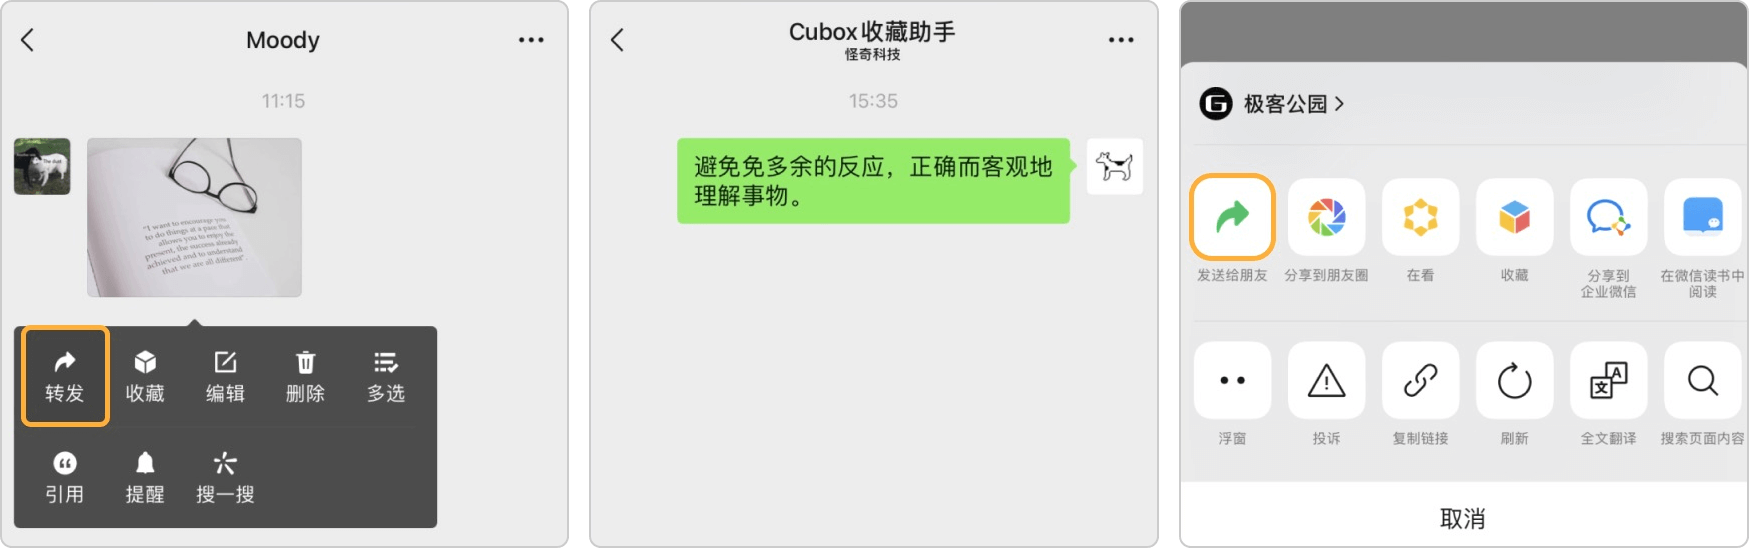 collect_wechat_2